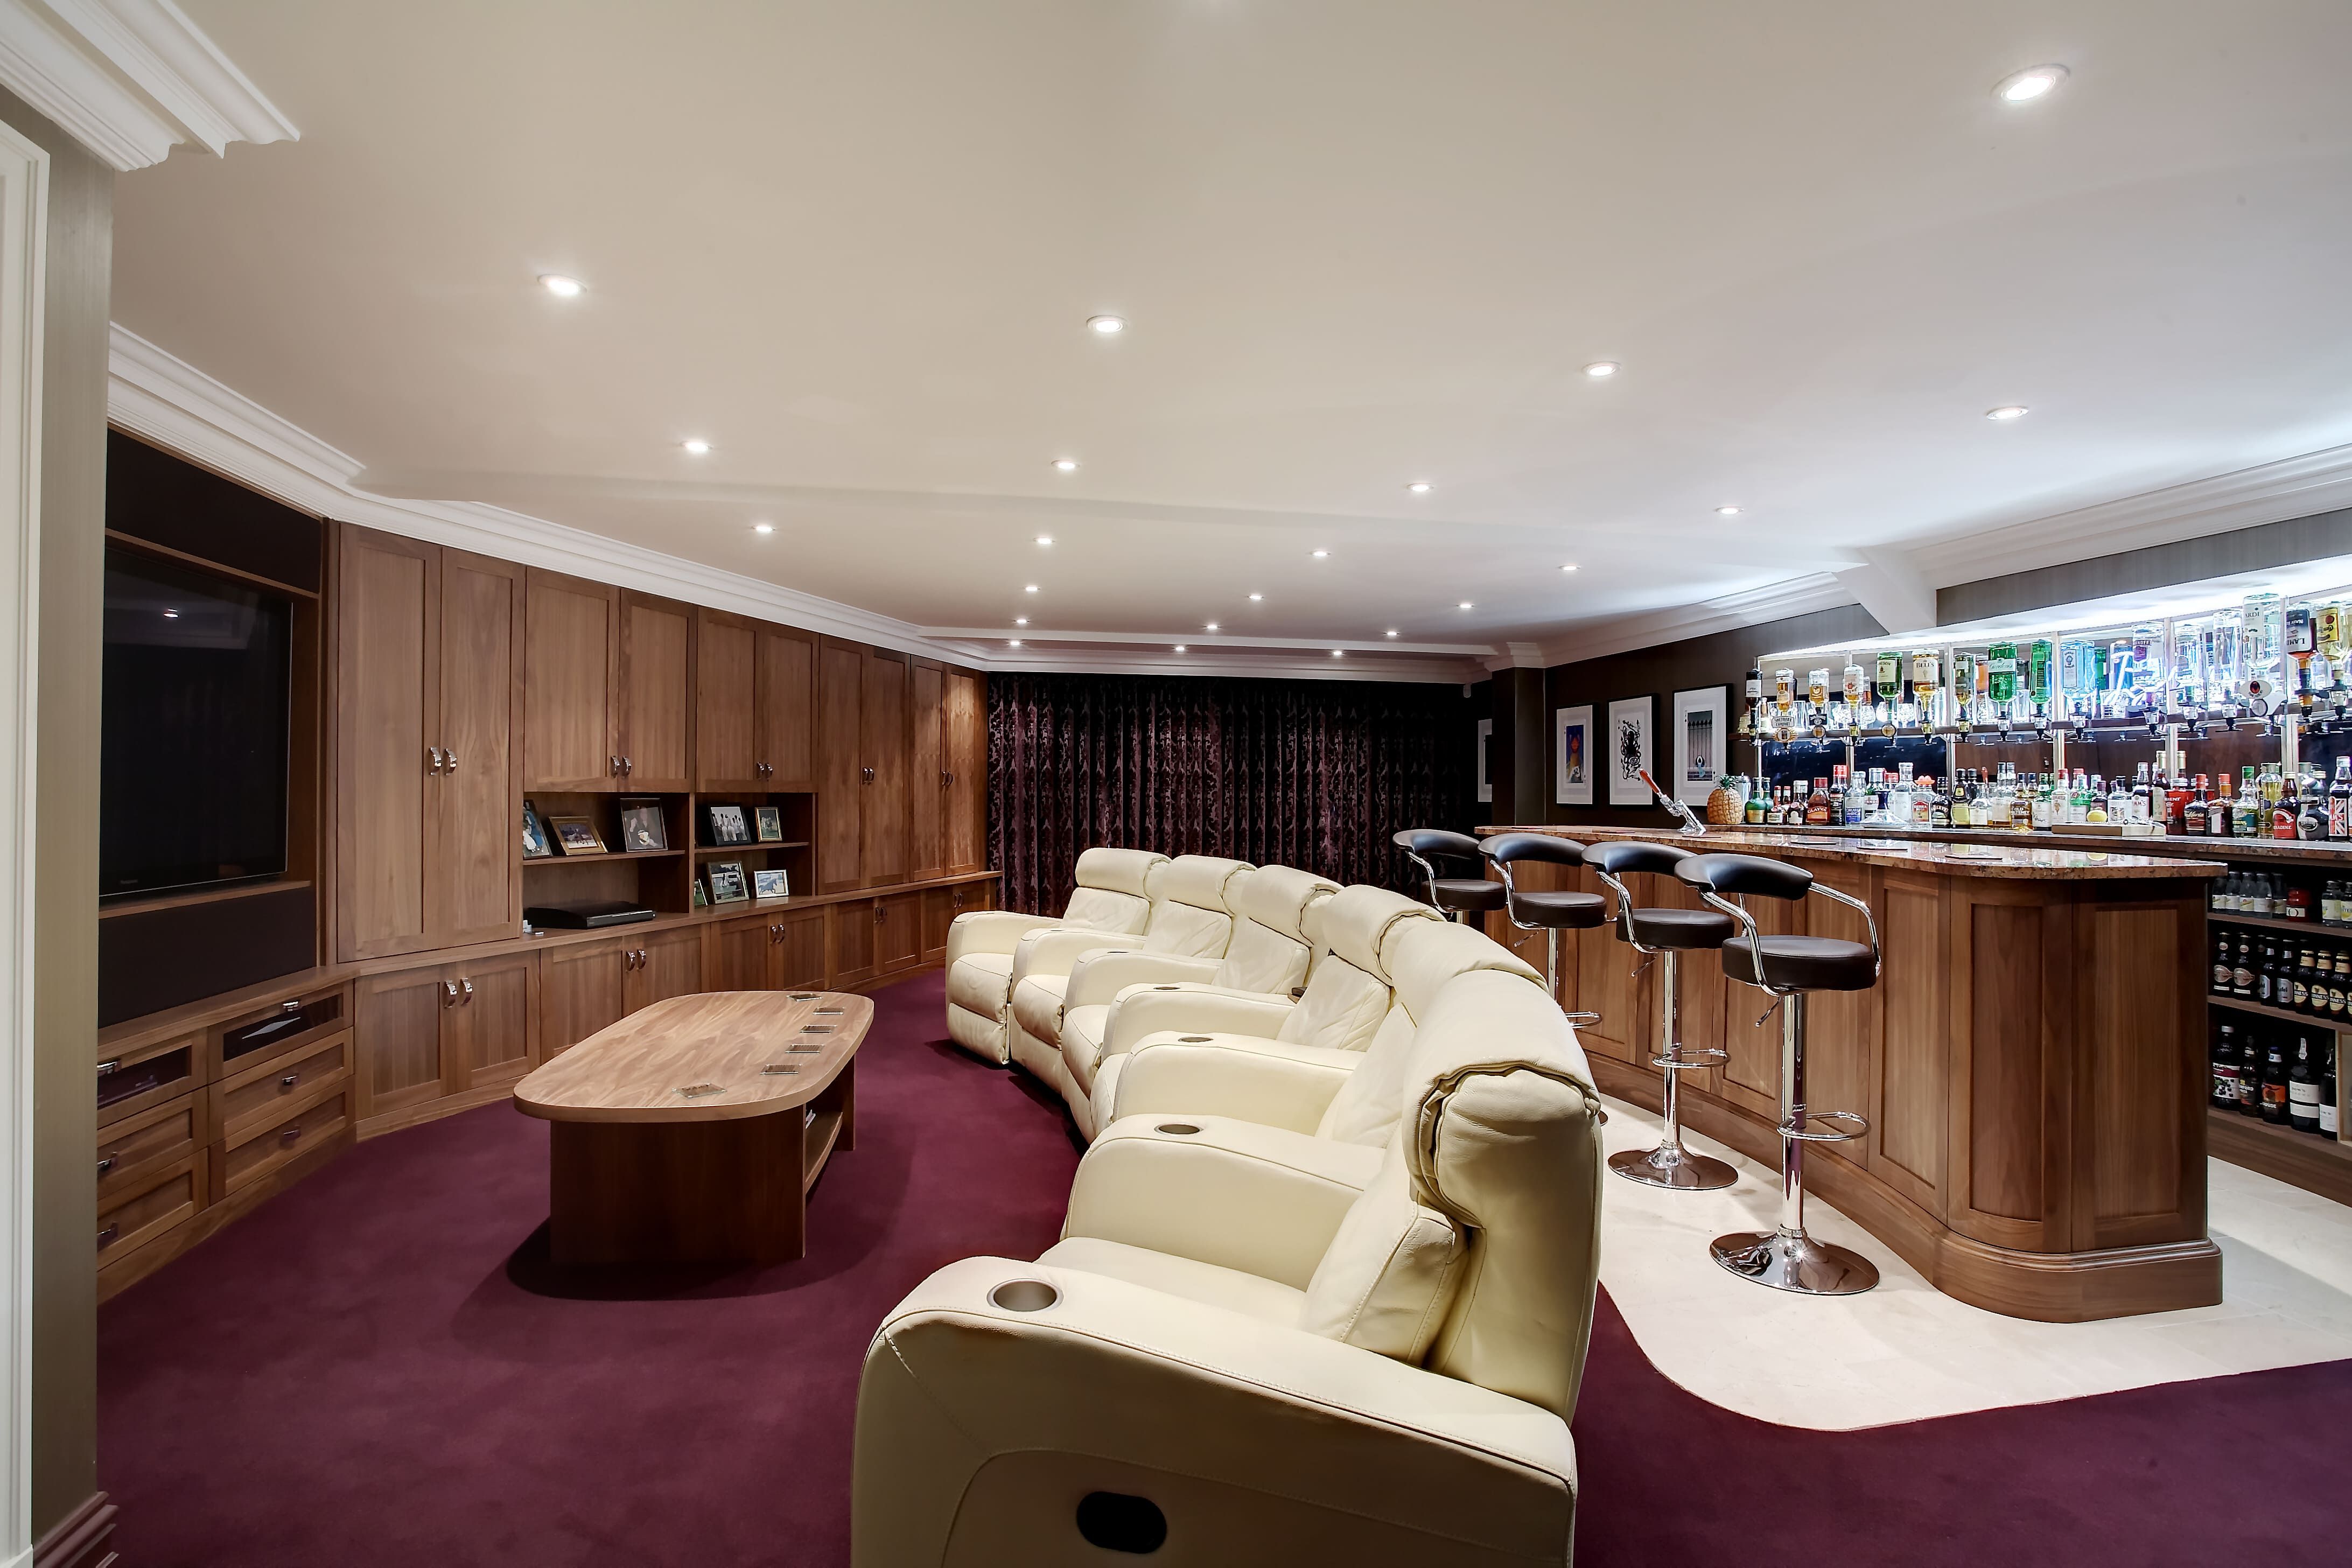 A bespoke, personal cinema room with bold colours. A burgundy carpet leads to a series of cream-coloured leather chairs in a radial shape. The room features floor-to-ceiling wooden cabinets, with a bar across the back wall.